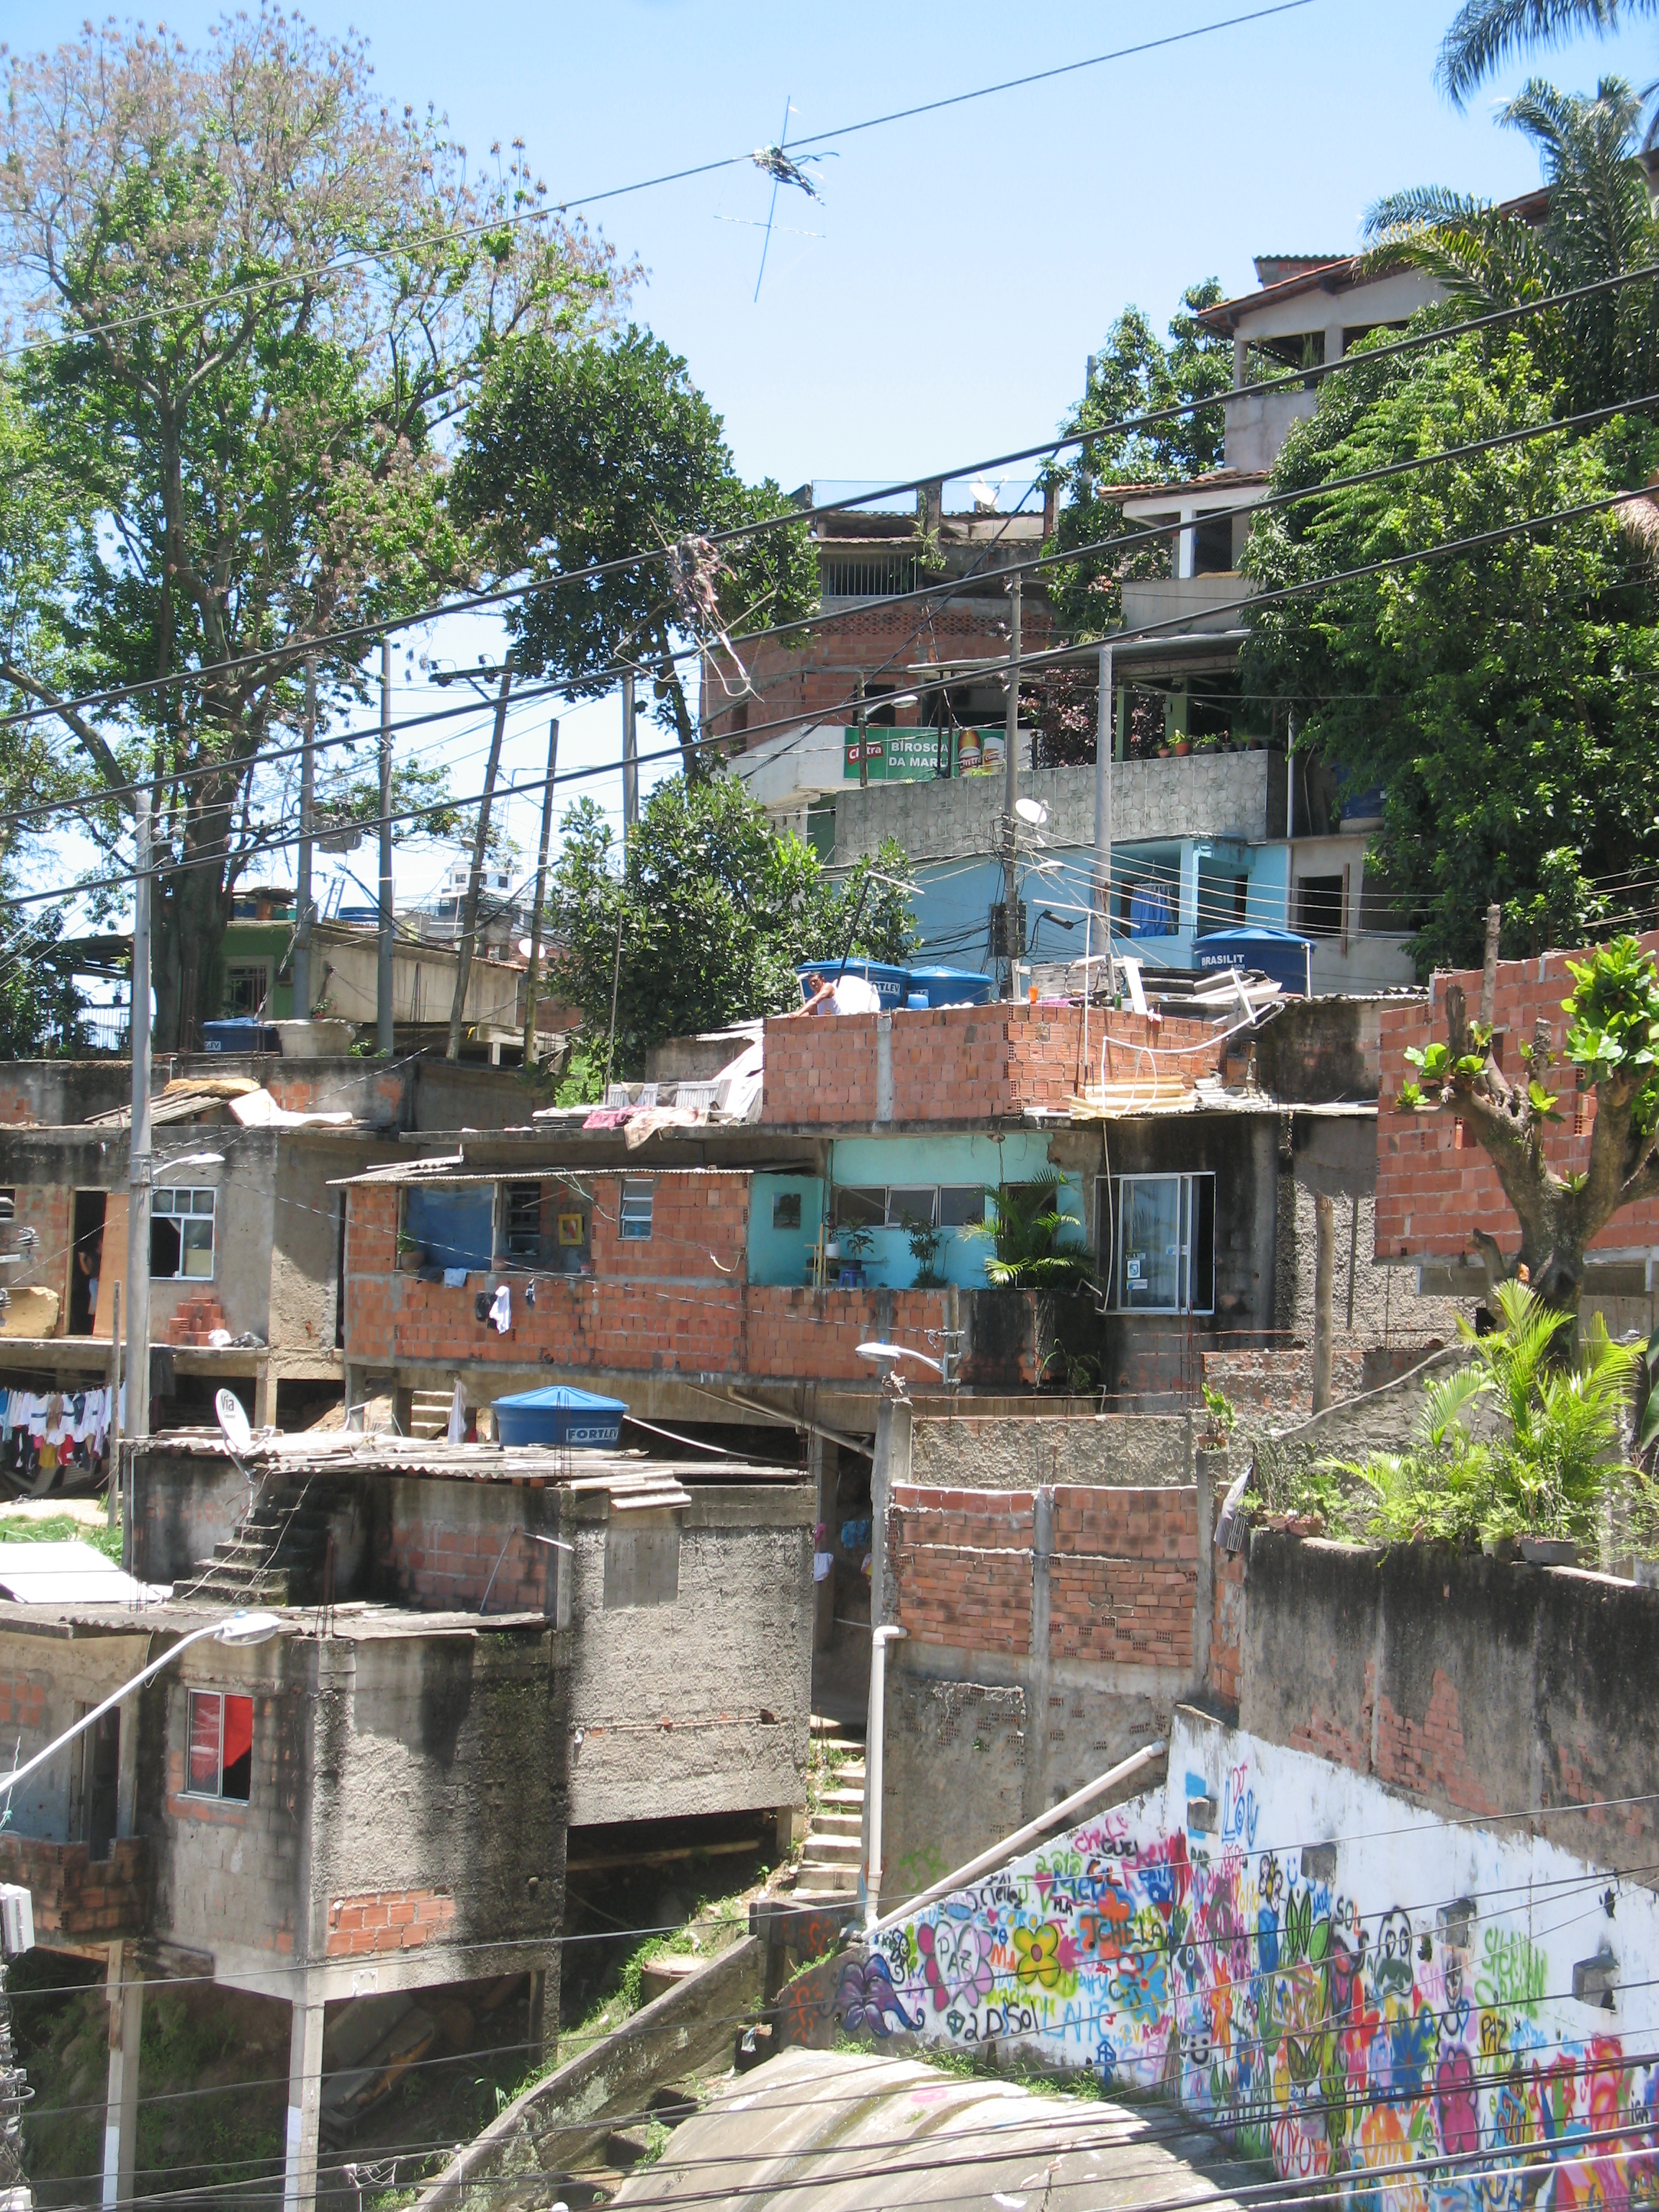 Favela Homes, One Layer at a Time